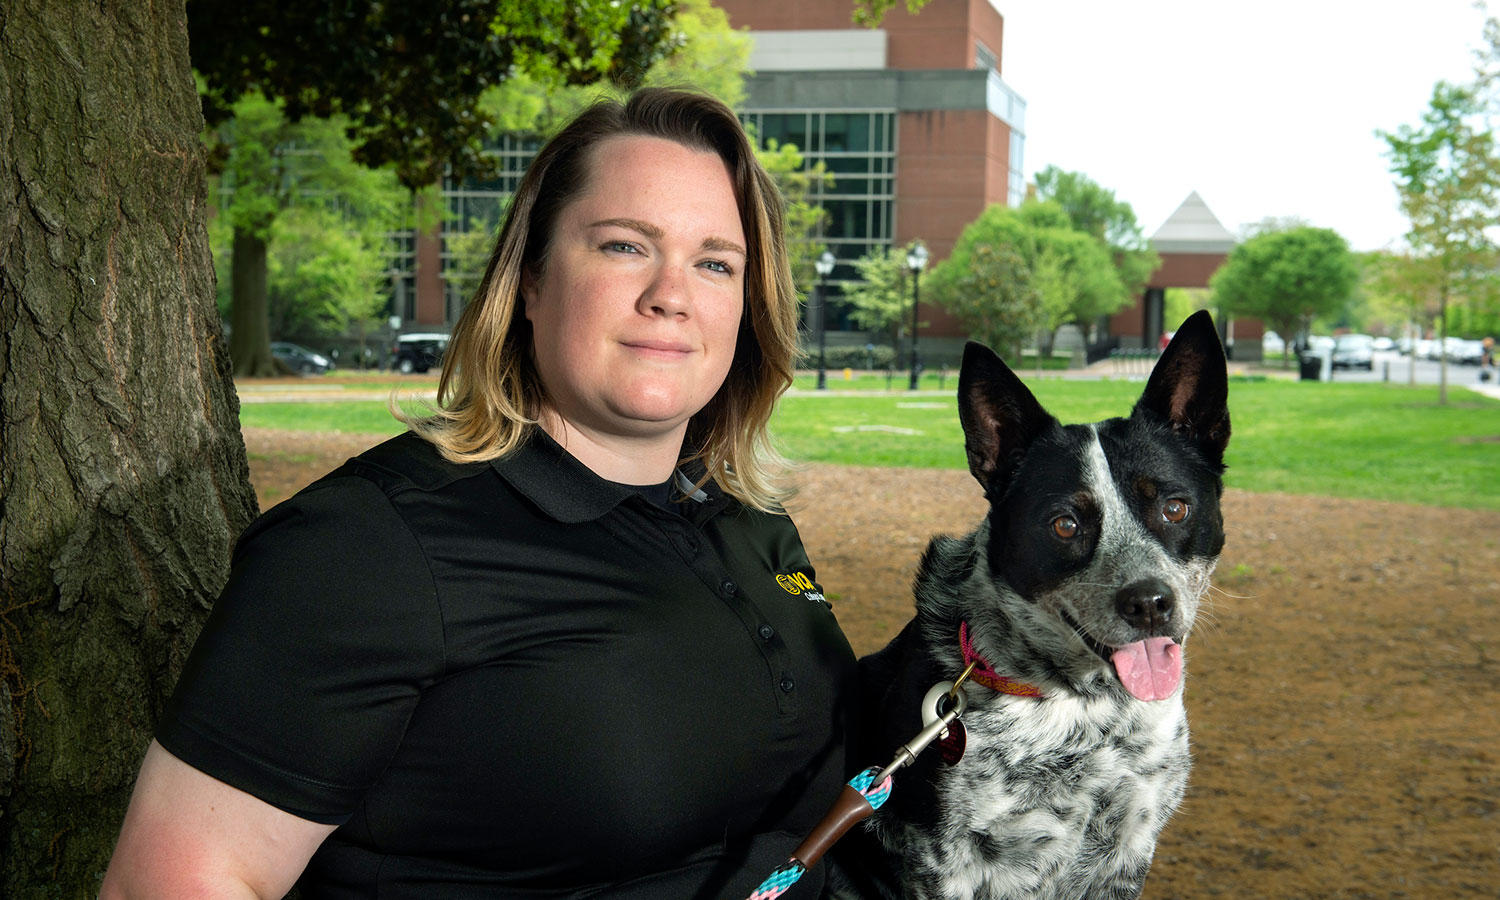 Ashley Lawrence and her dog, Roxie, in Monroe Park, with the College of Engineering's West Hall in the background.